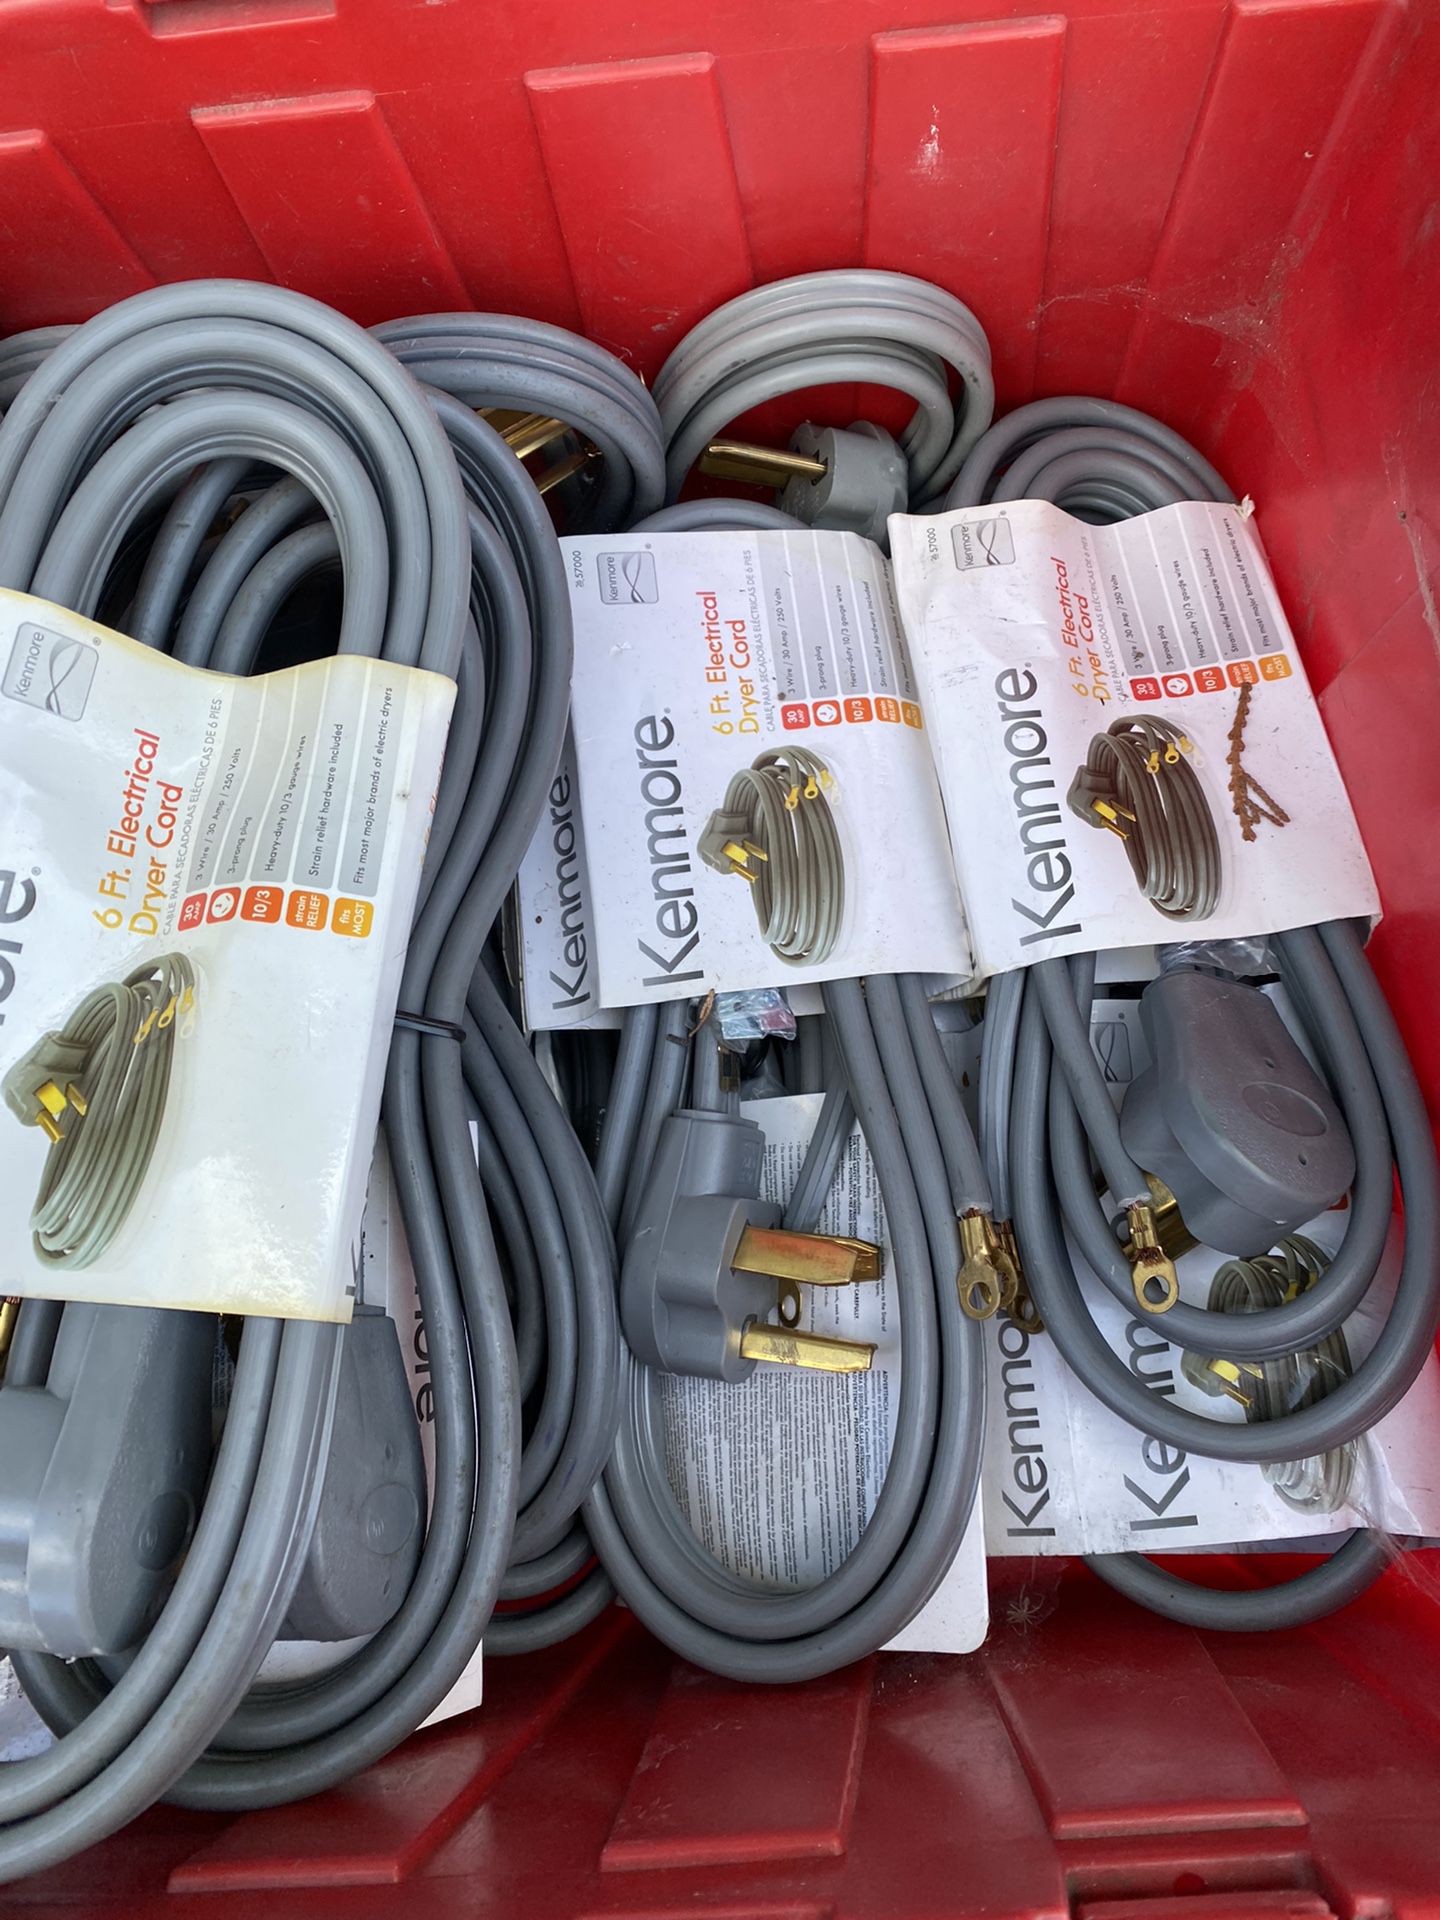 Electric Power cords For Dryer /Range